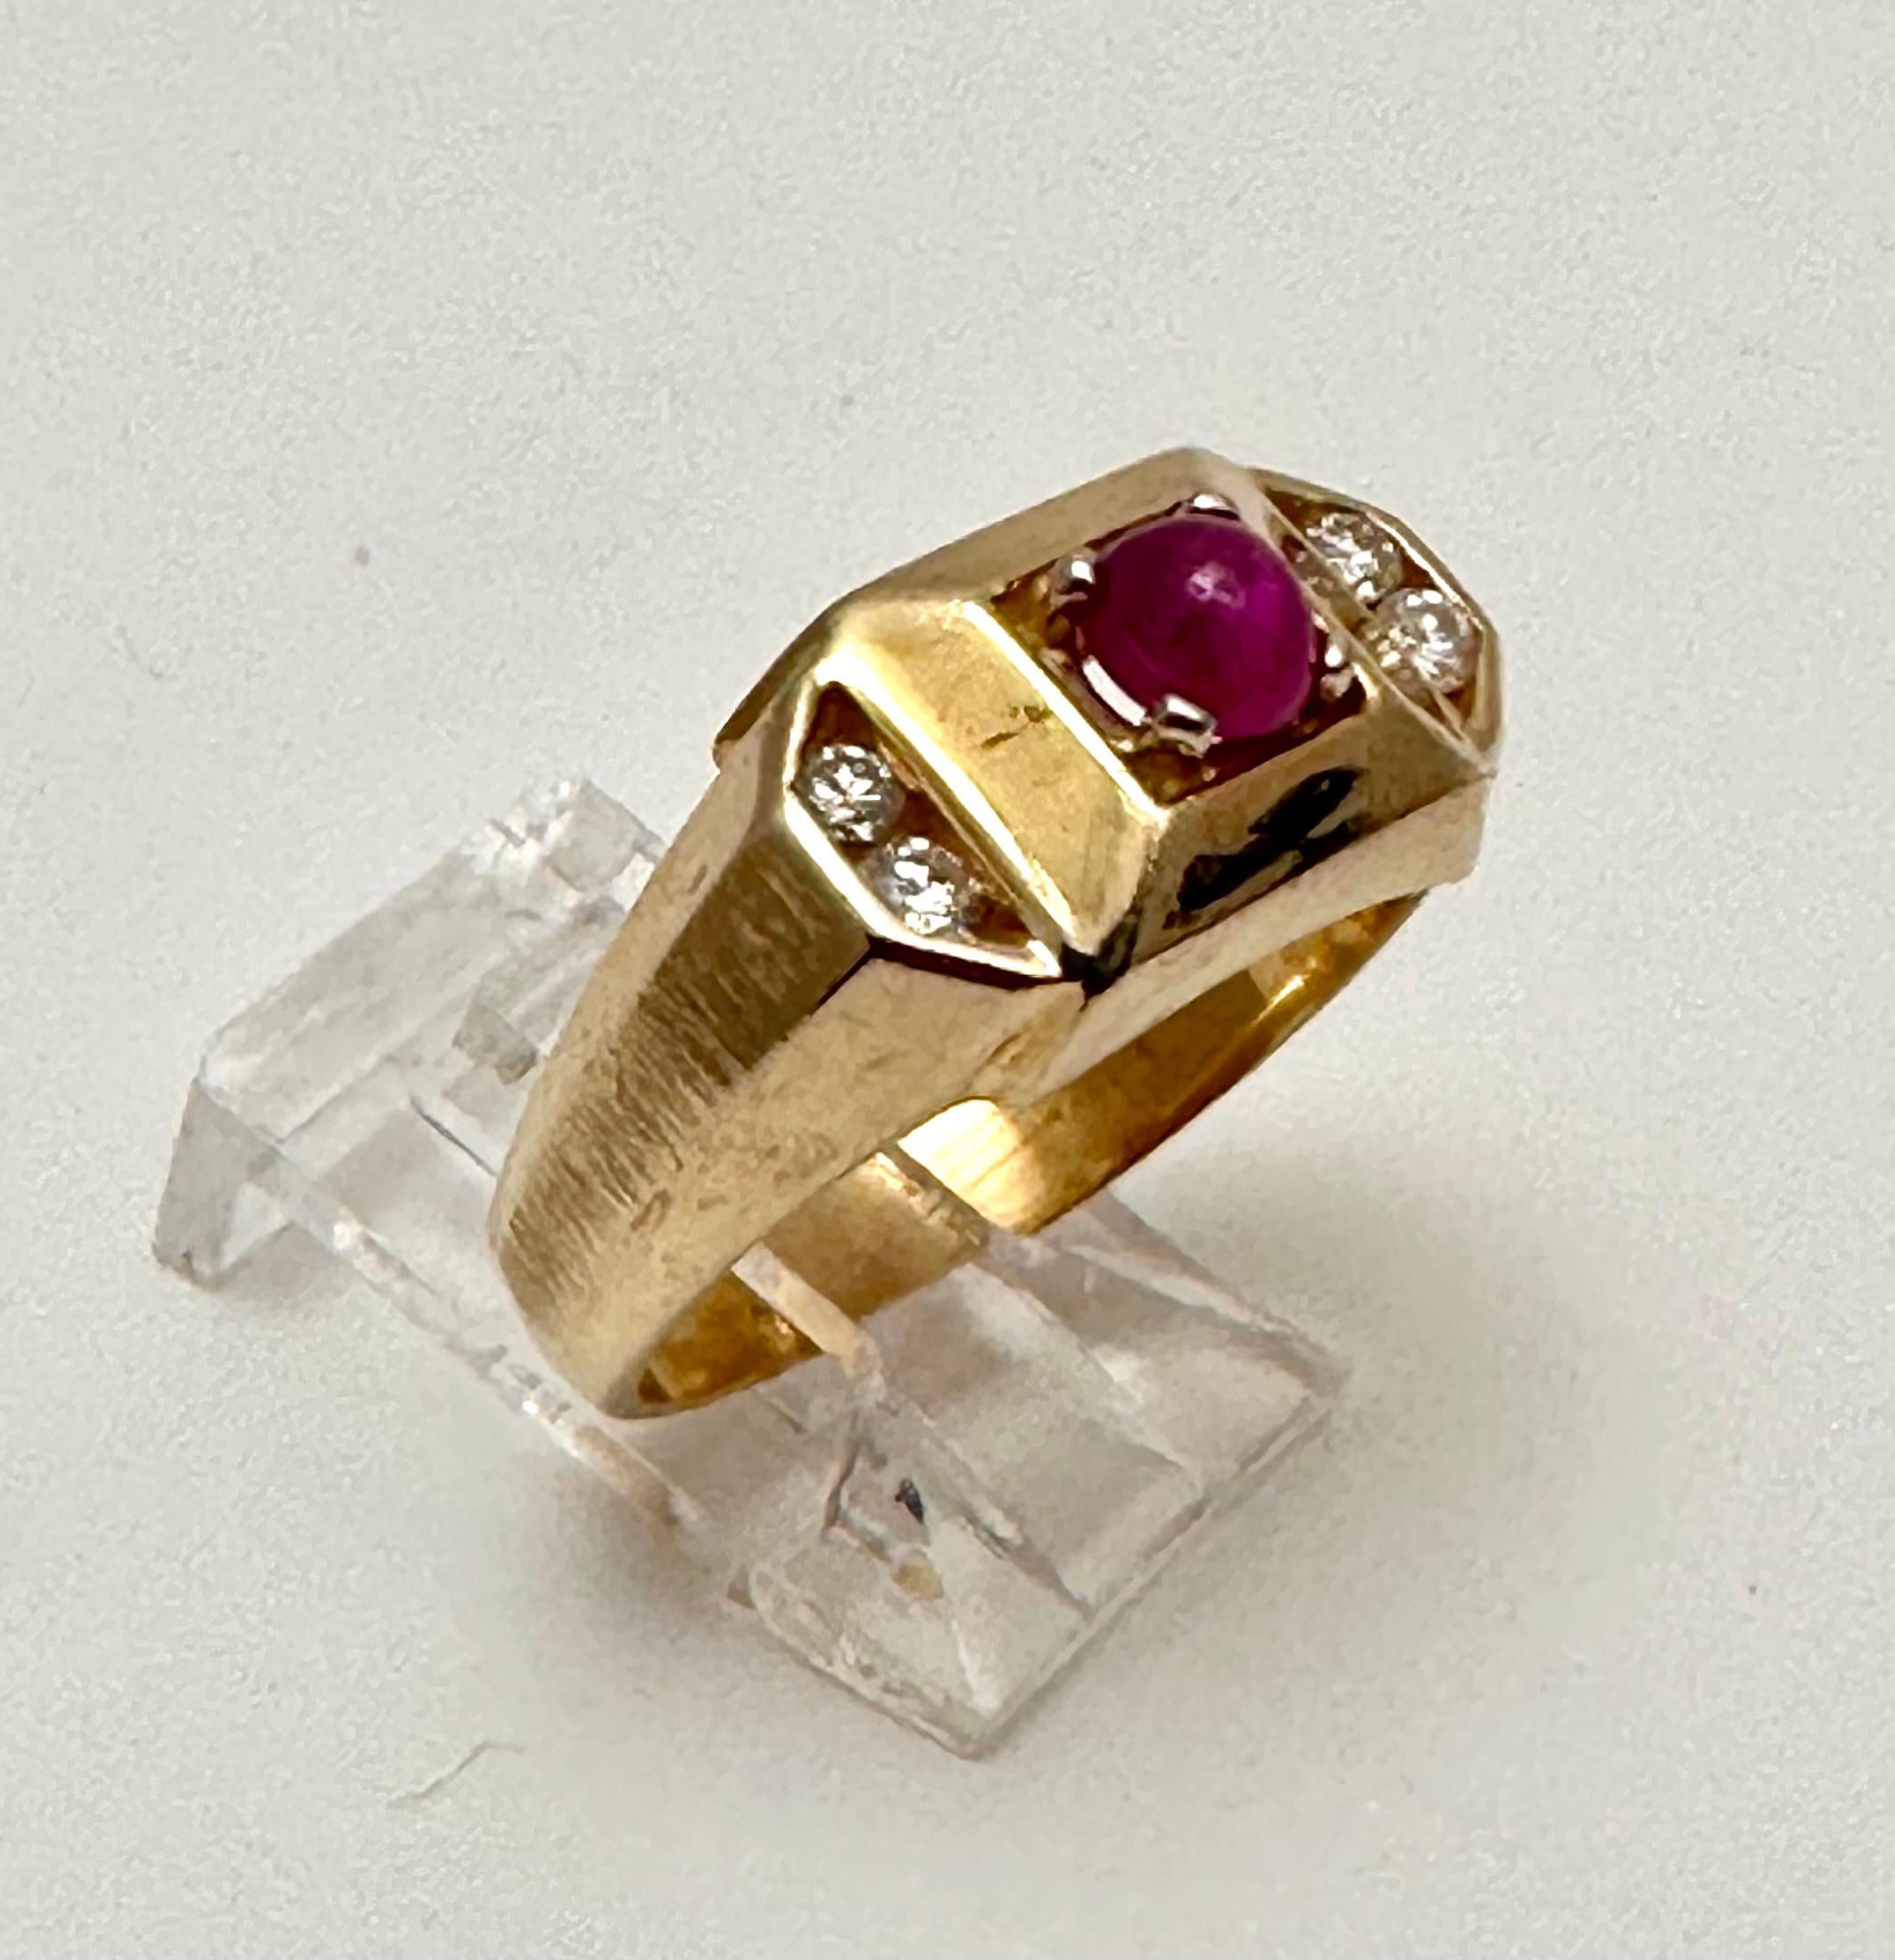 14k Yellow Gold 5mm Cabochon Ruby with 4 Round Diamonds Ring Size 9 1/2 In New Condition For Sale In Las Vegas, NV